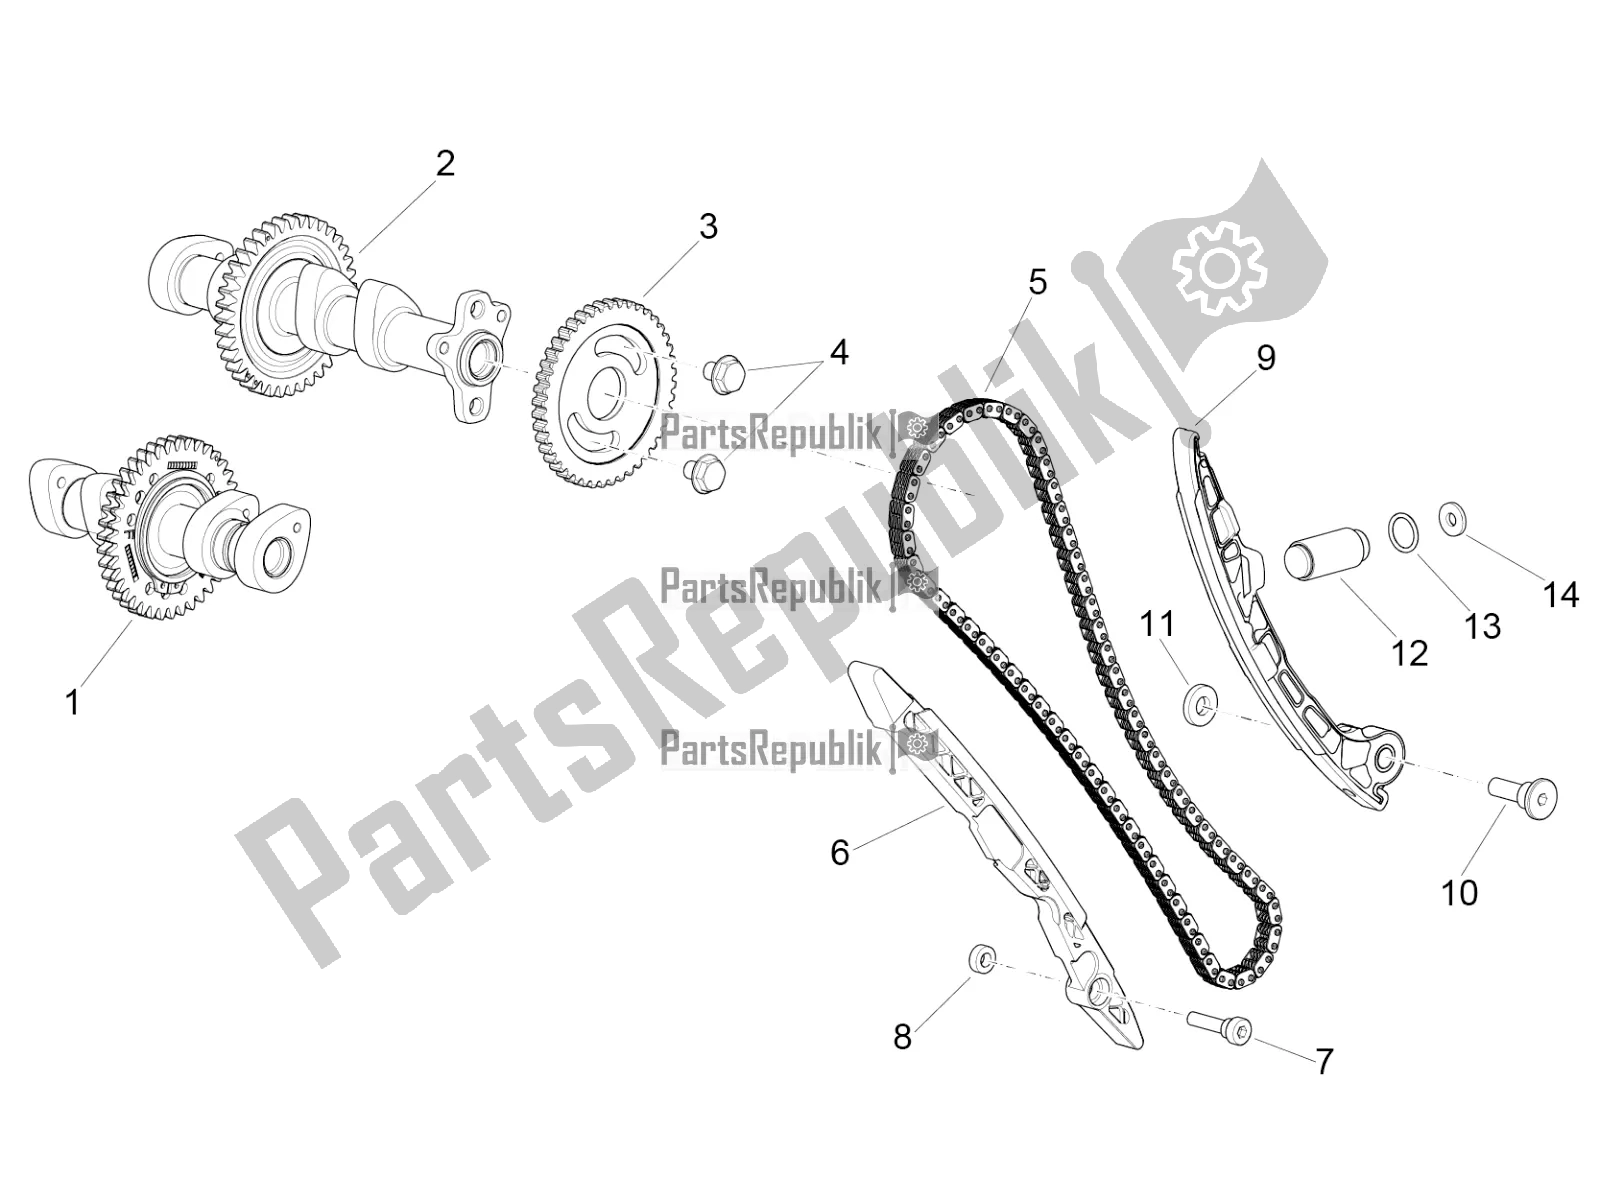 All parts for the Front Cylinder Timing System of the Aprilia RSV4 1100 ABS Apac 2021